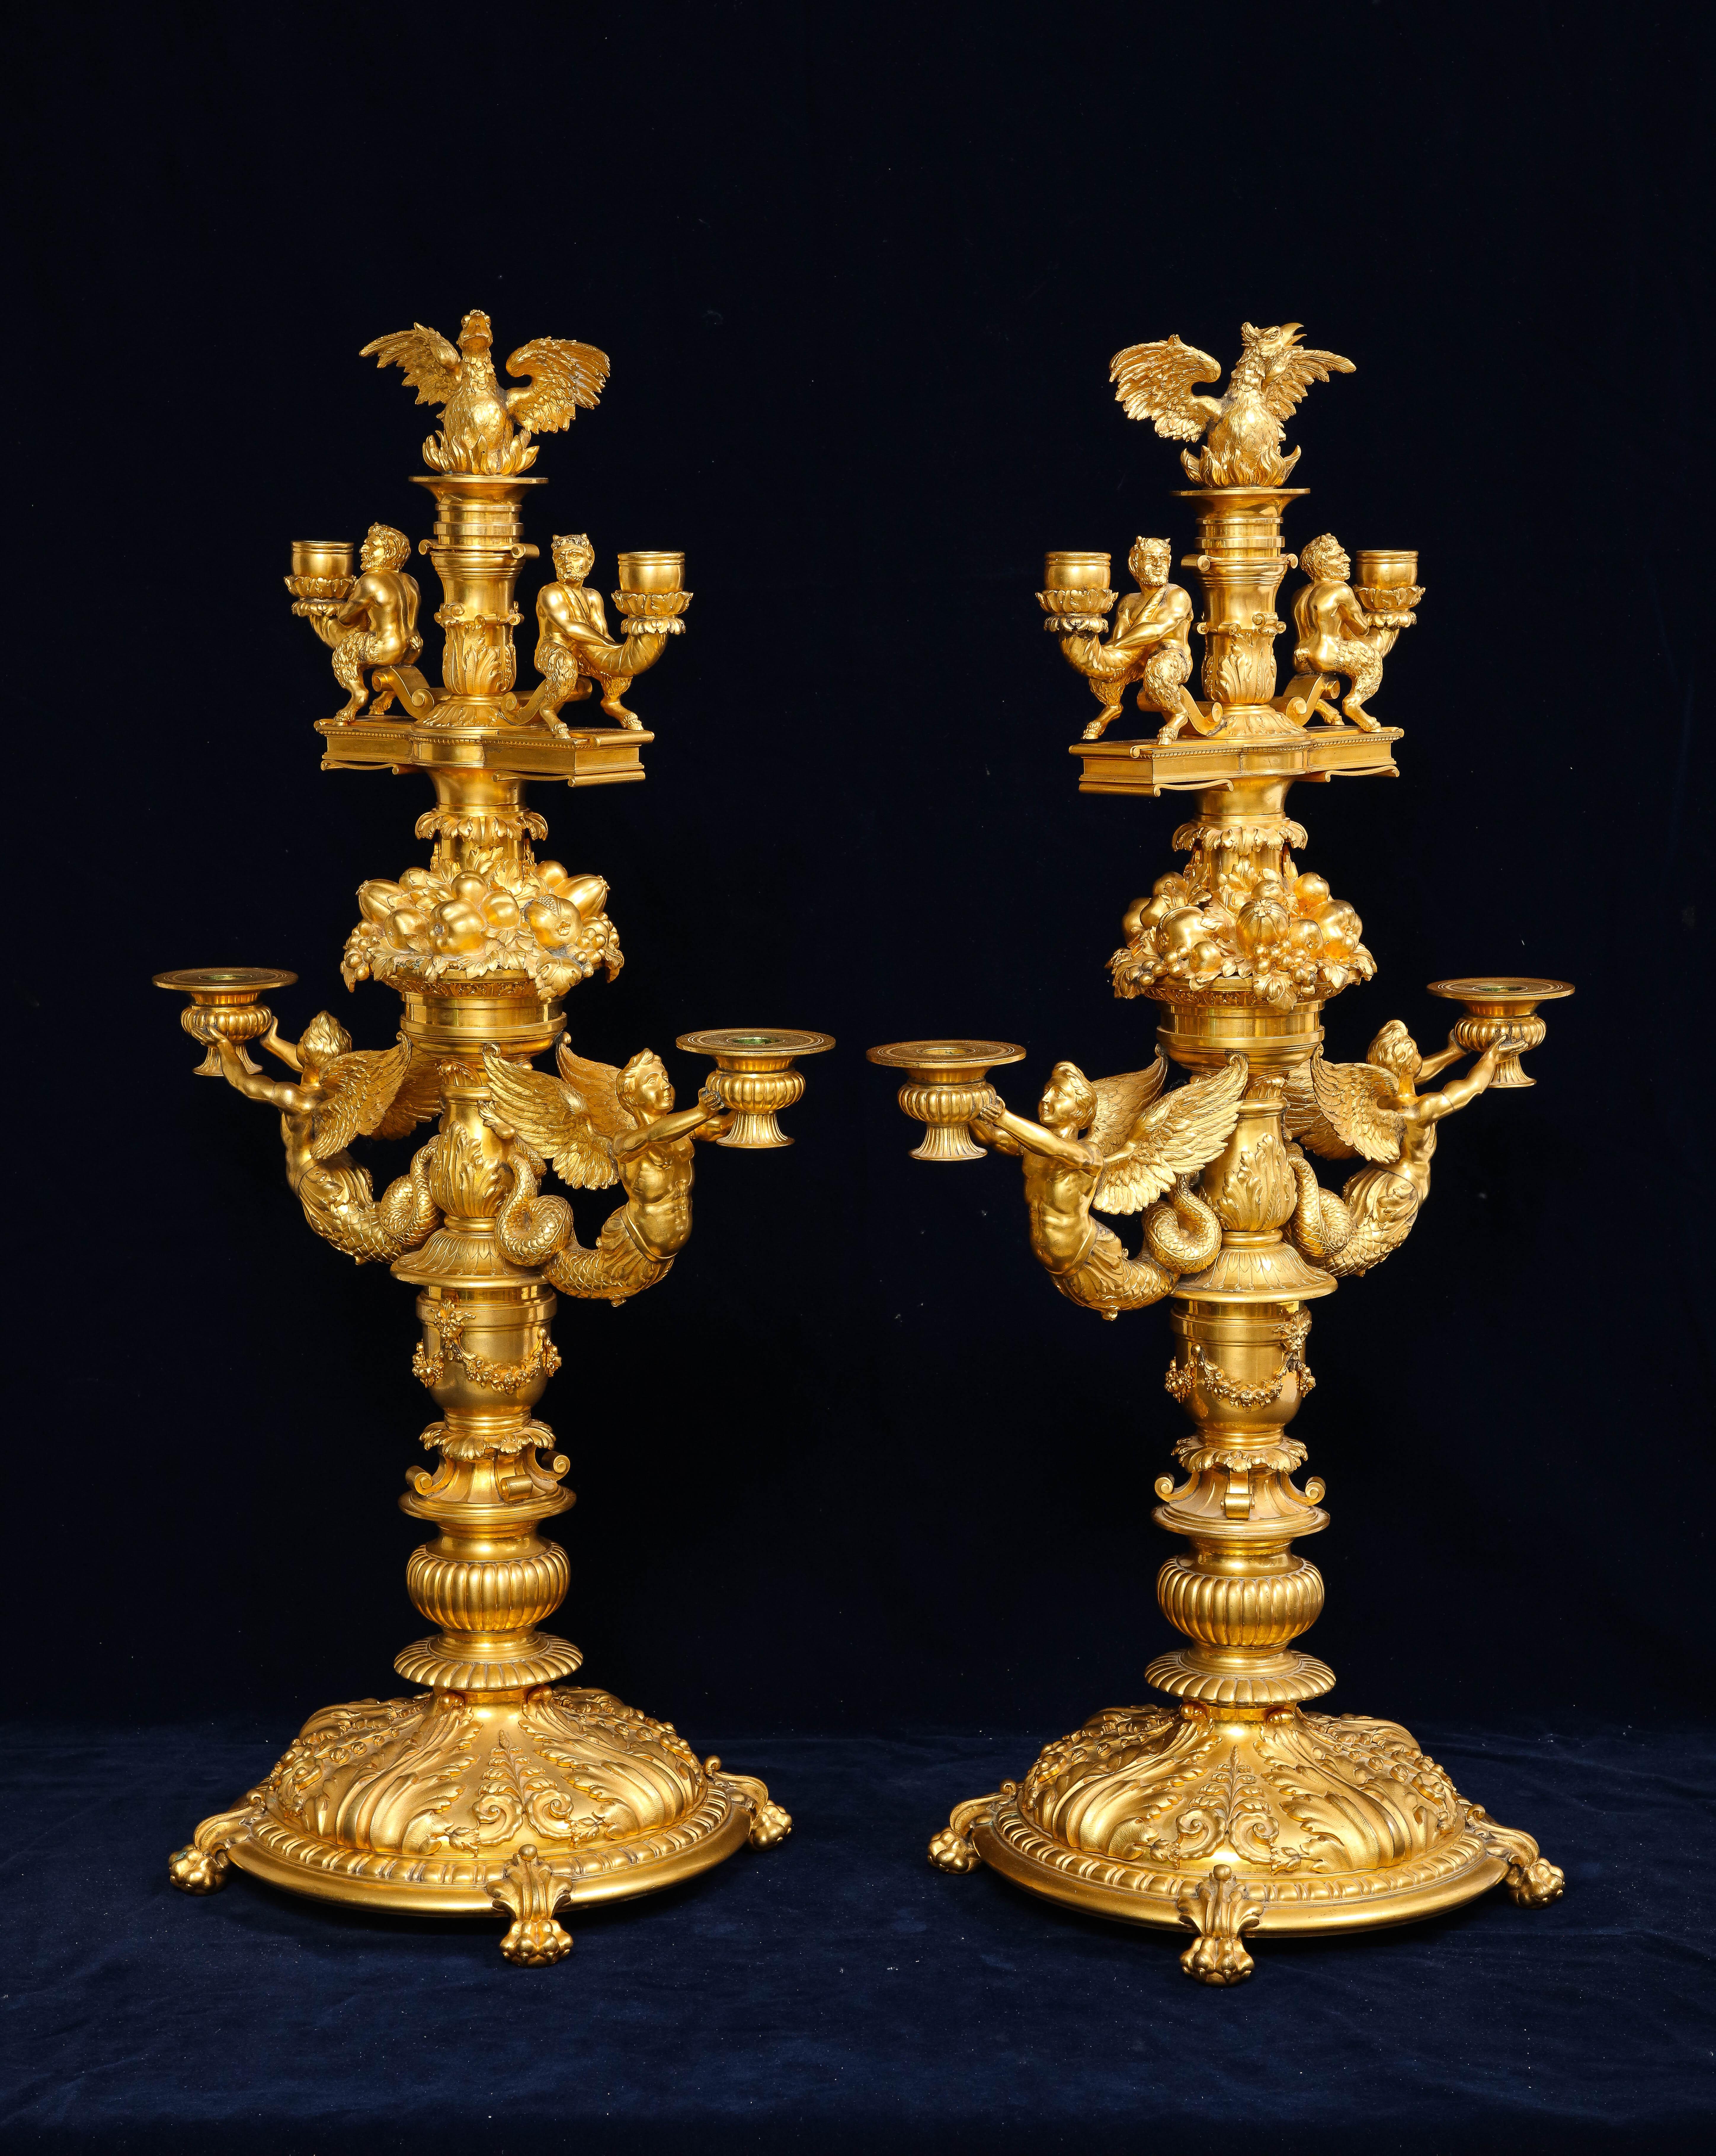 Gilt Marvelous Pair of 19th C. French Ormolu Four Arm Candelabras, Signed P. Canaux For Sale